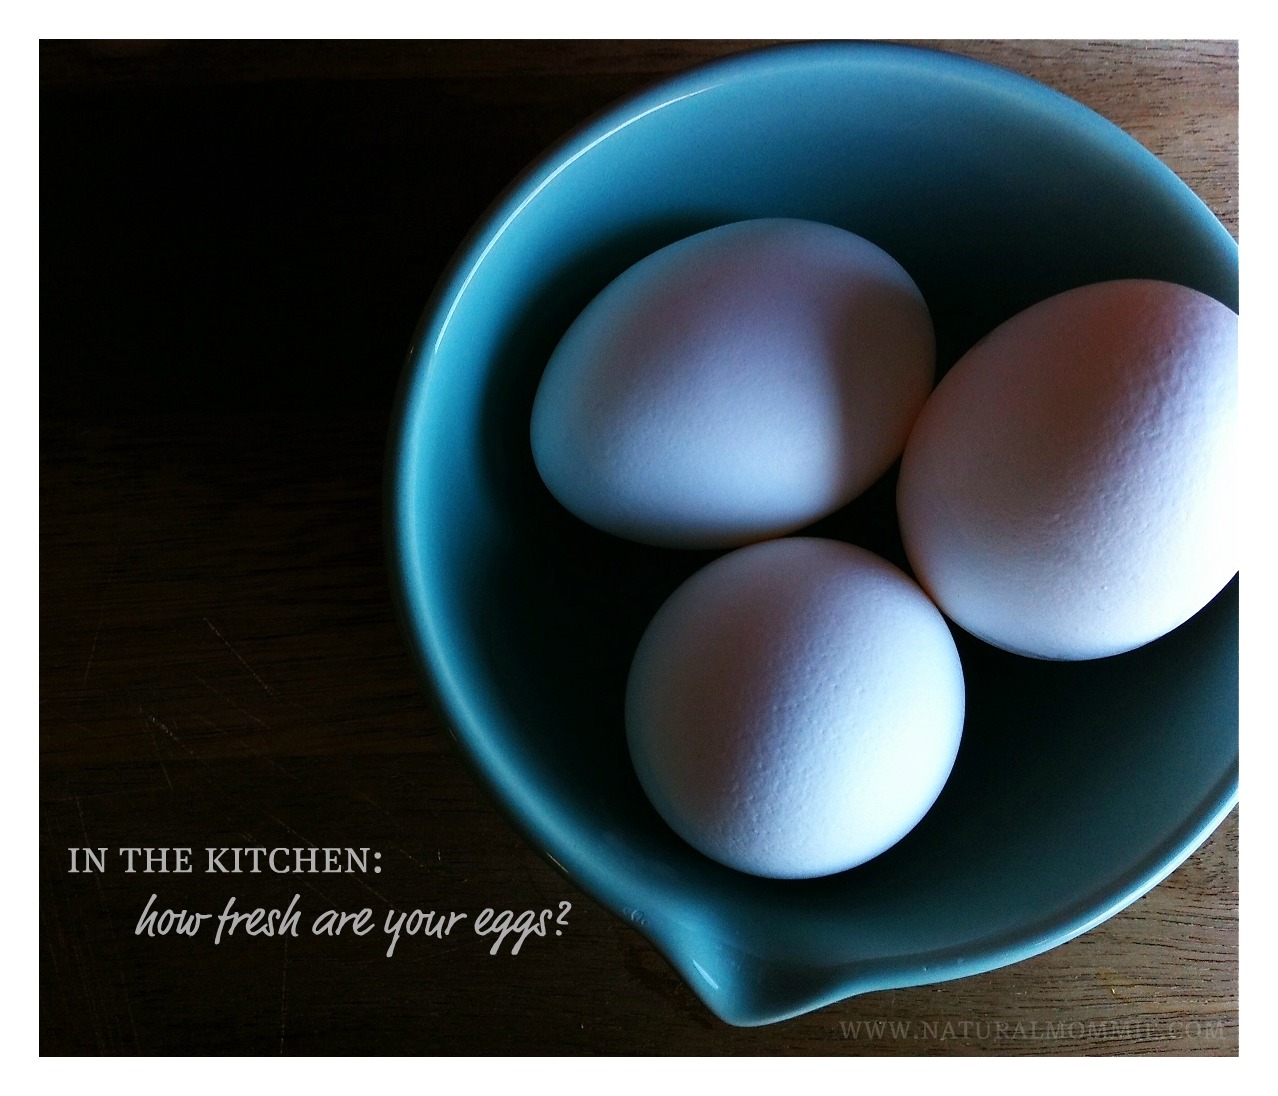 in the kitchen: how fresh are your eggs?